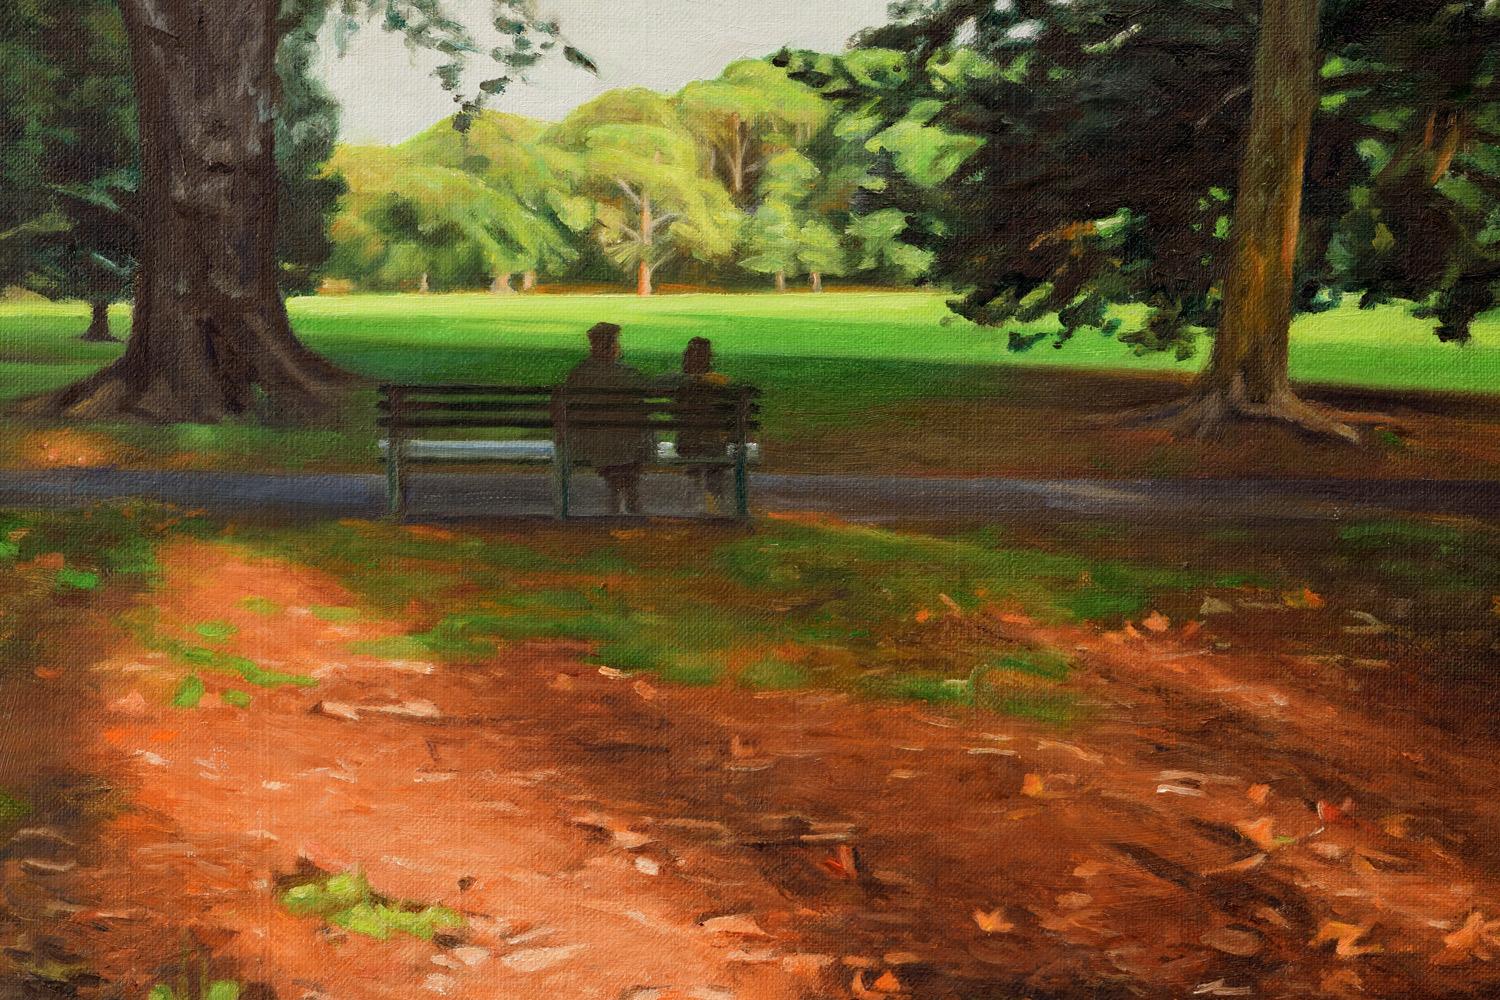 <p>Artist Comments<br>Artist Nick Savides captures a late afternoon scene in early autumn at Prospect Park, Brooklyn. On a bench, two figures sit facing the serene and peaceful Long Meadow, indulging in nature's beauty and engaging in a heartfelt